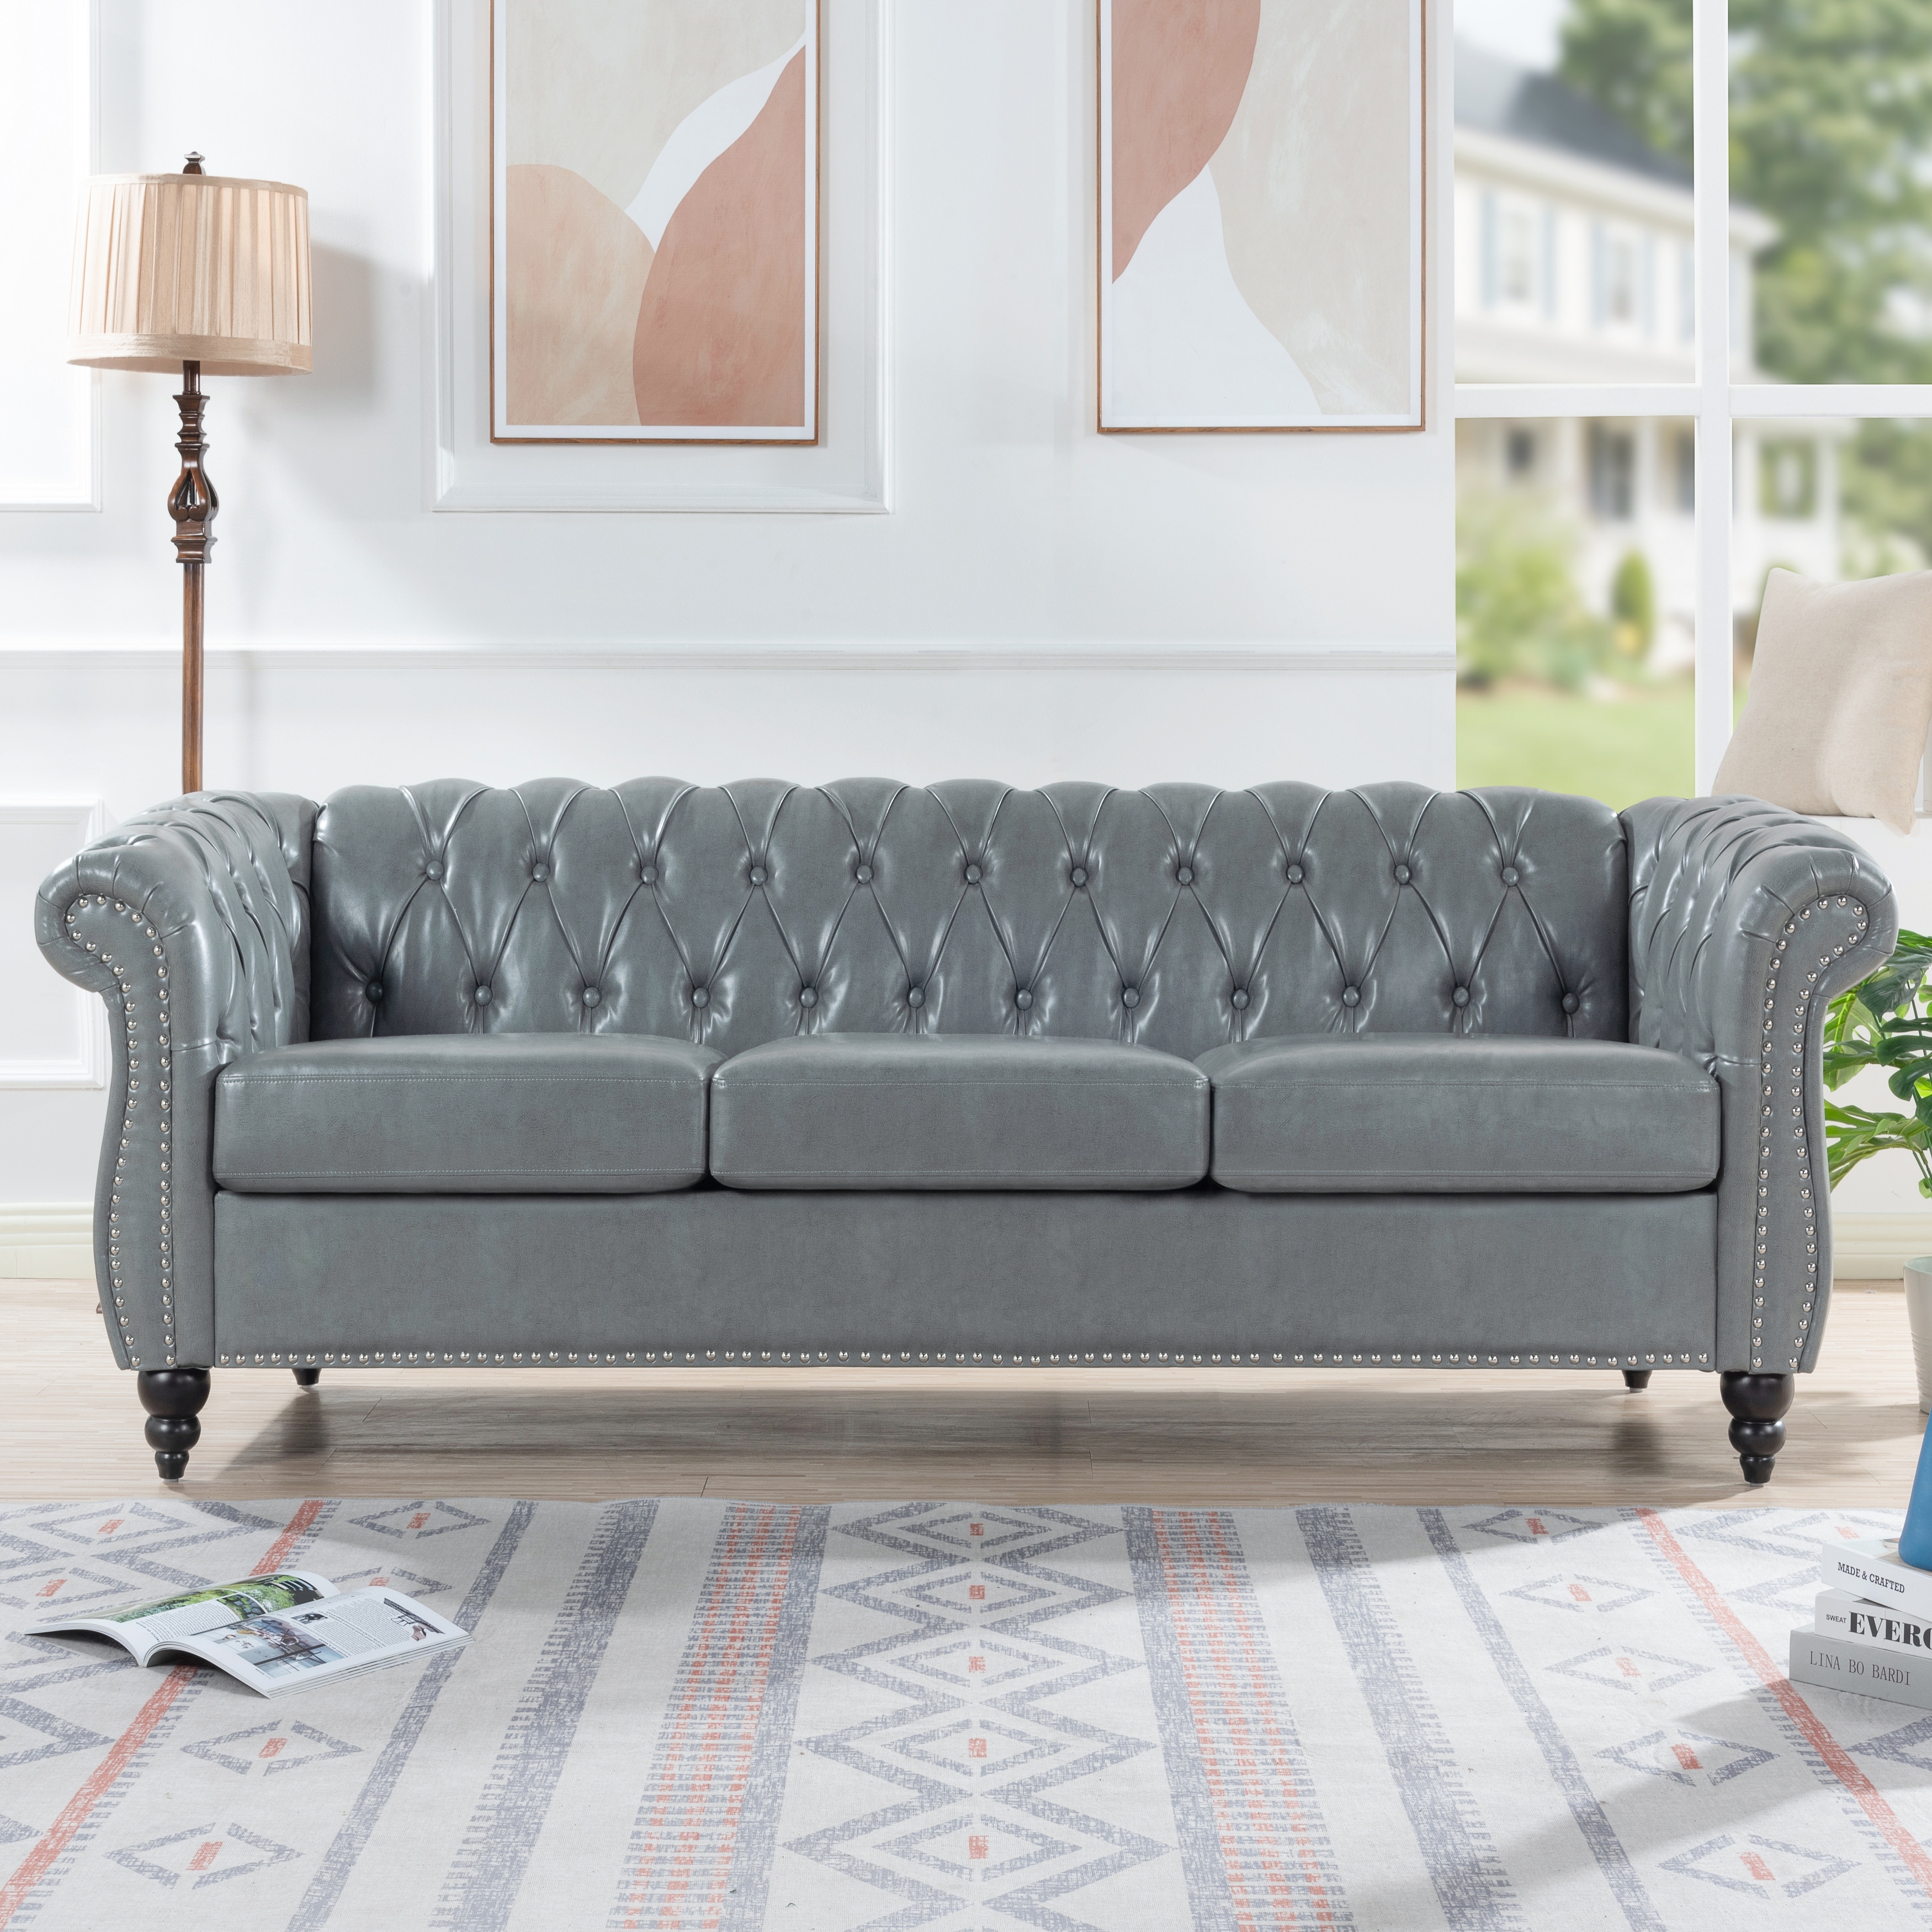 Sophisticated Grey Chesterfield 3-seater Sofa Couch - A Luxurious Settee With Elegant Nailhead Trim